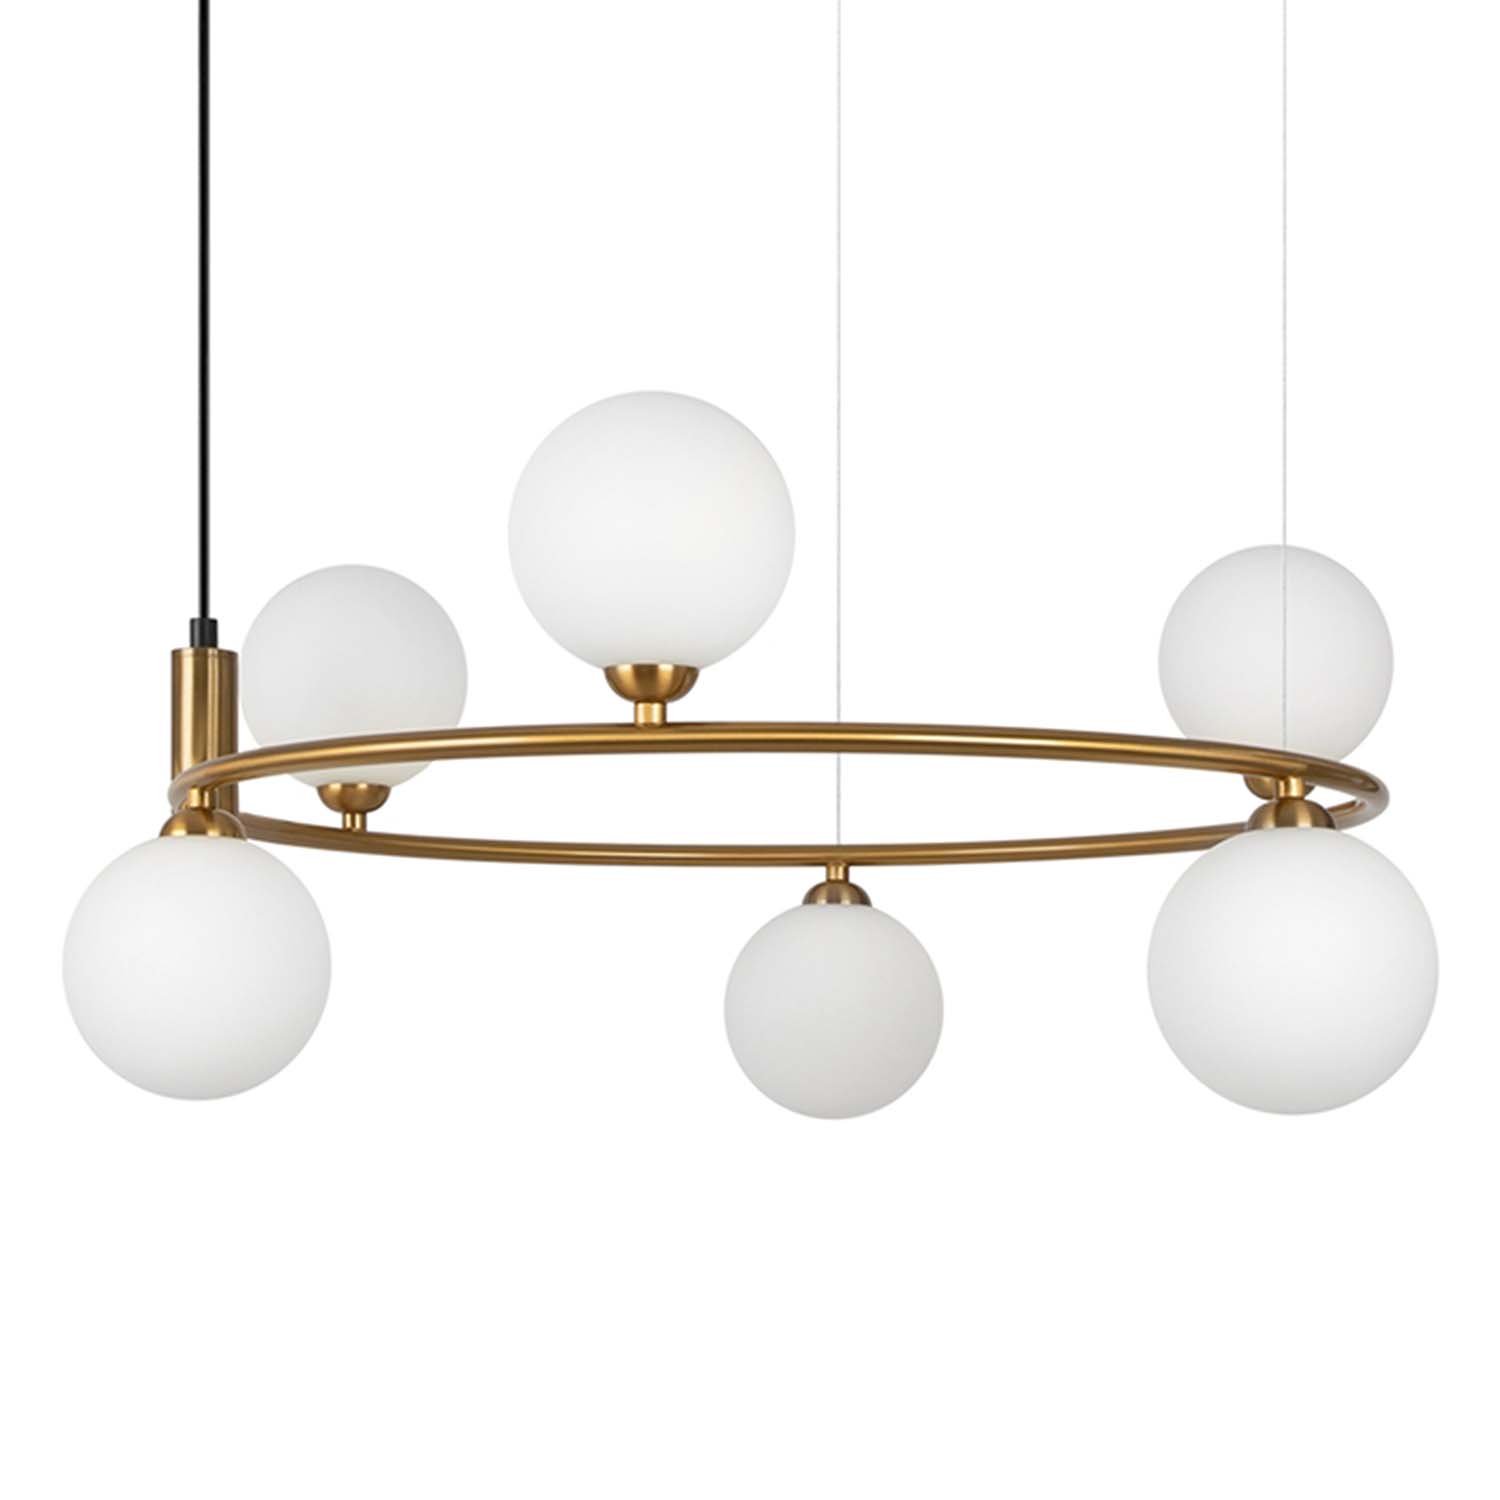 RING - Chic circular chandelier with glass balls, black, white or gold